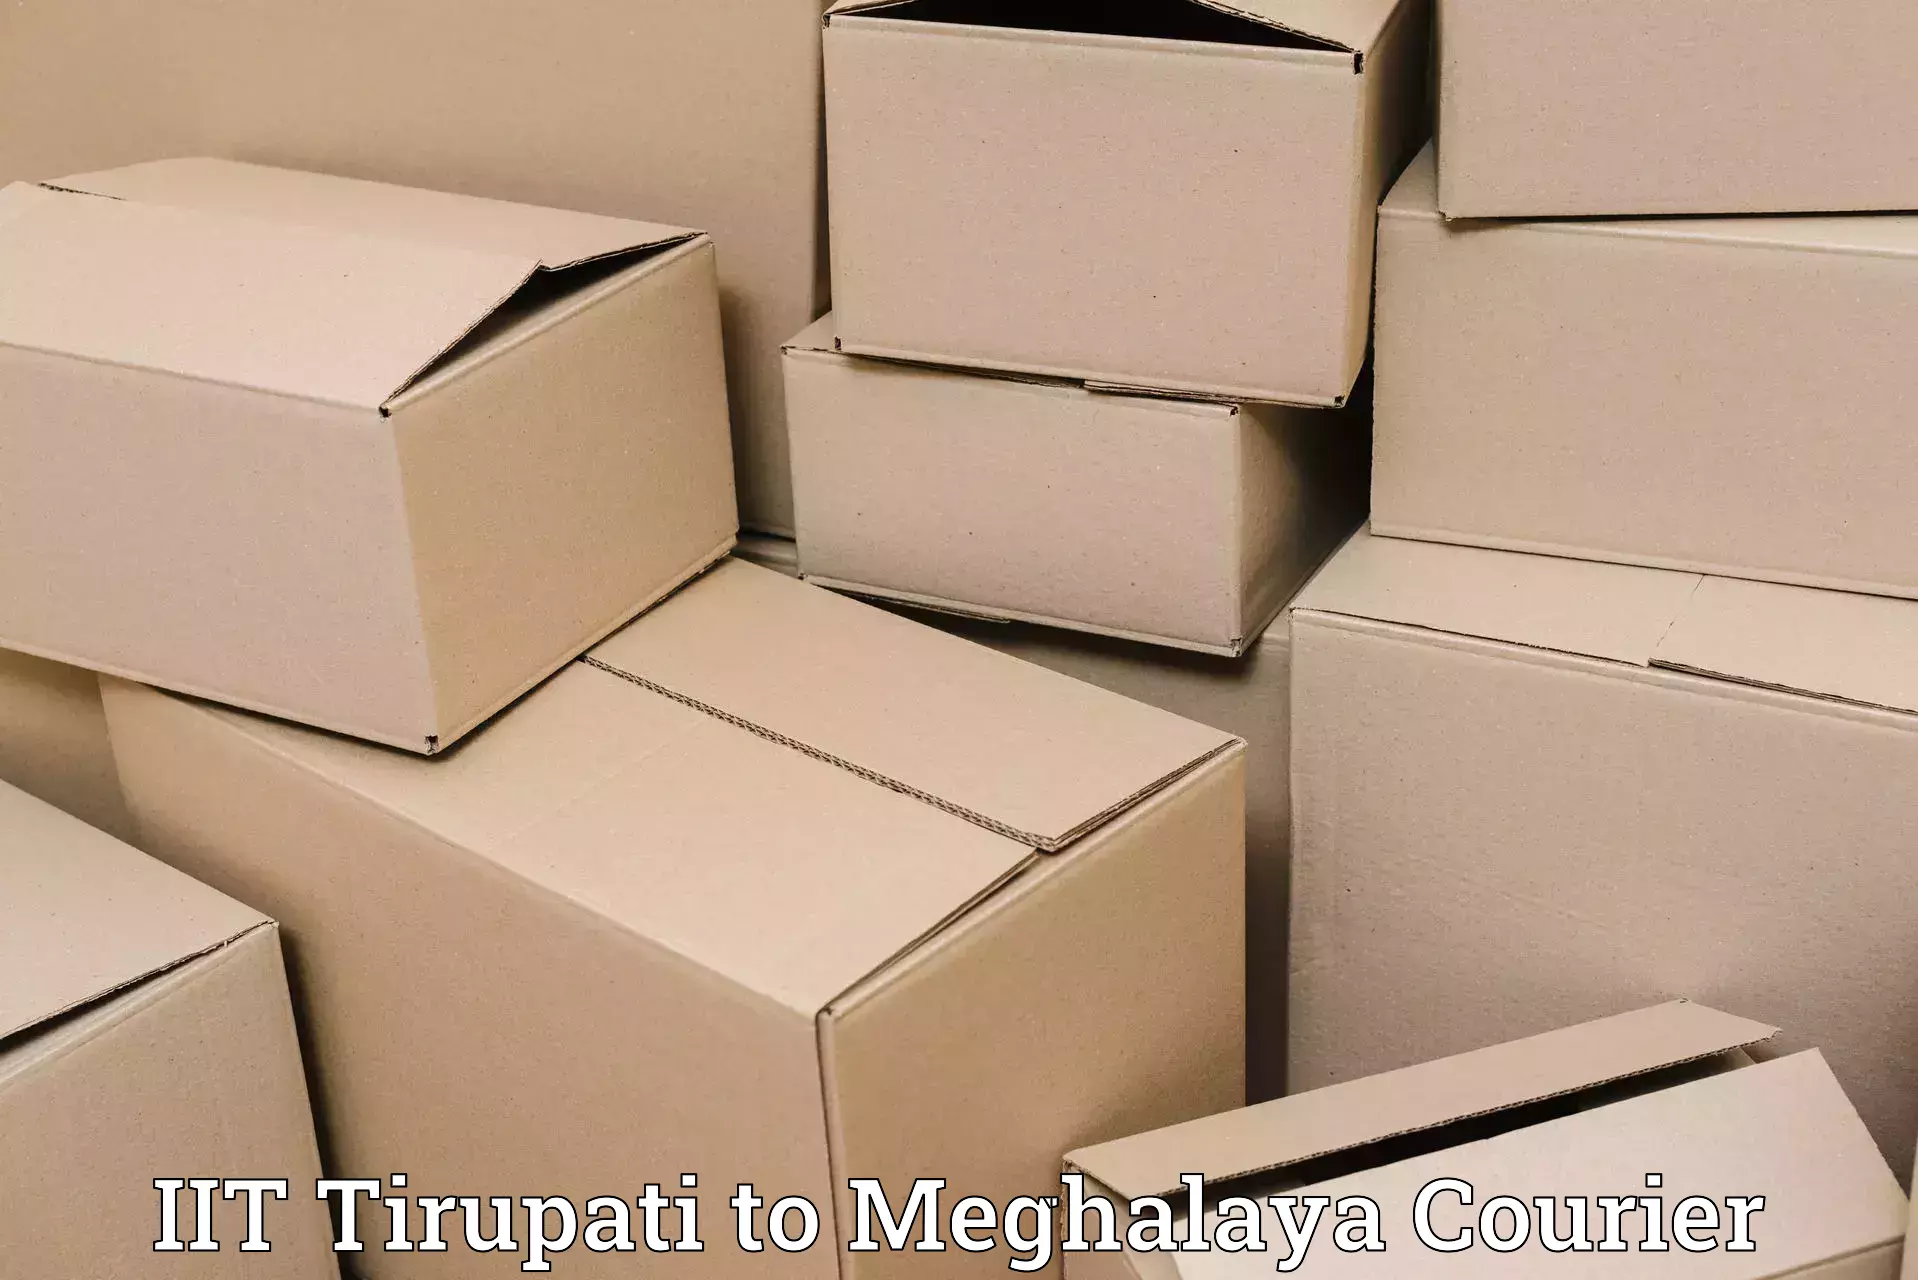 Business delivery service IIT Tirupati to Tura